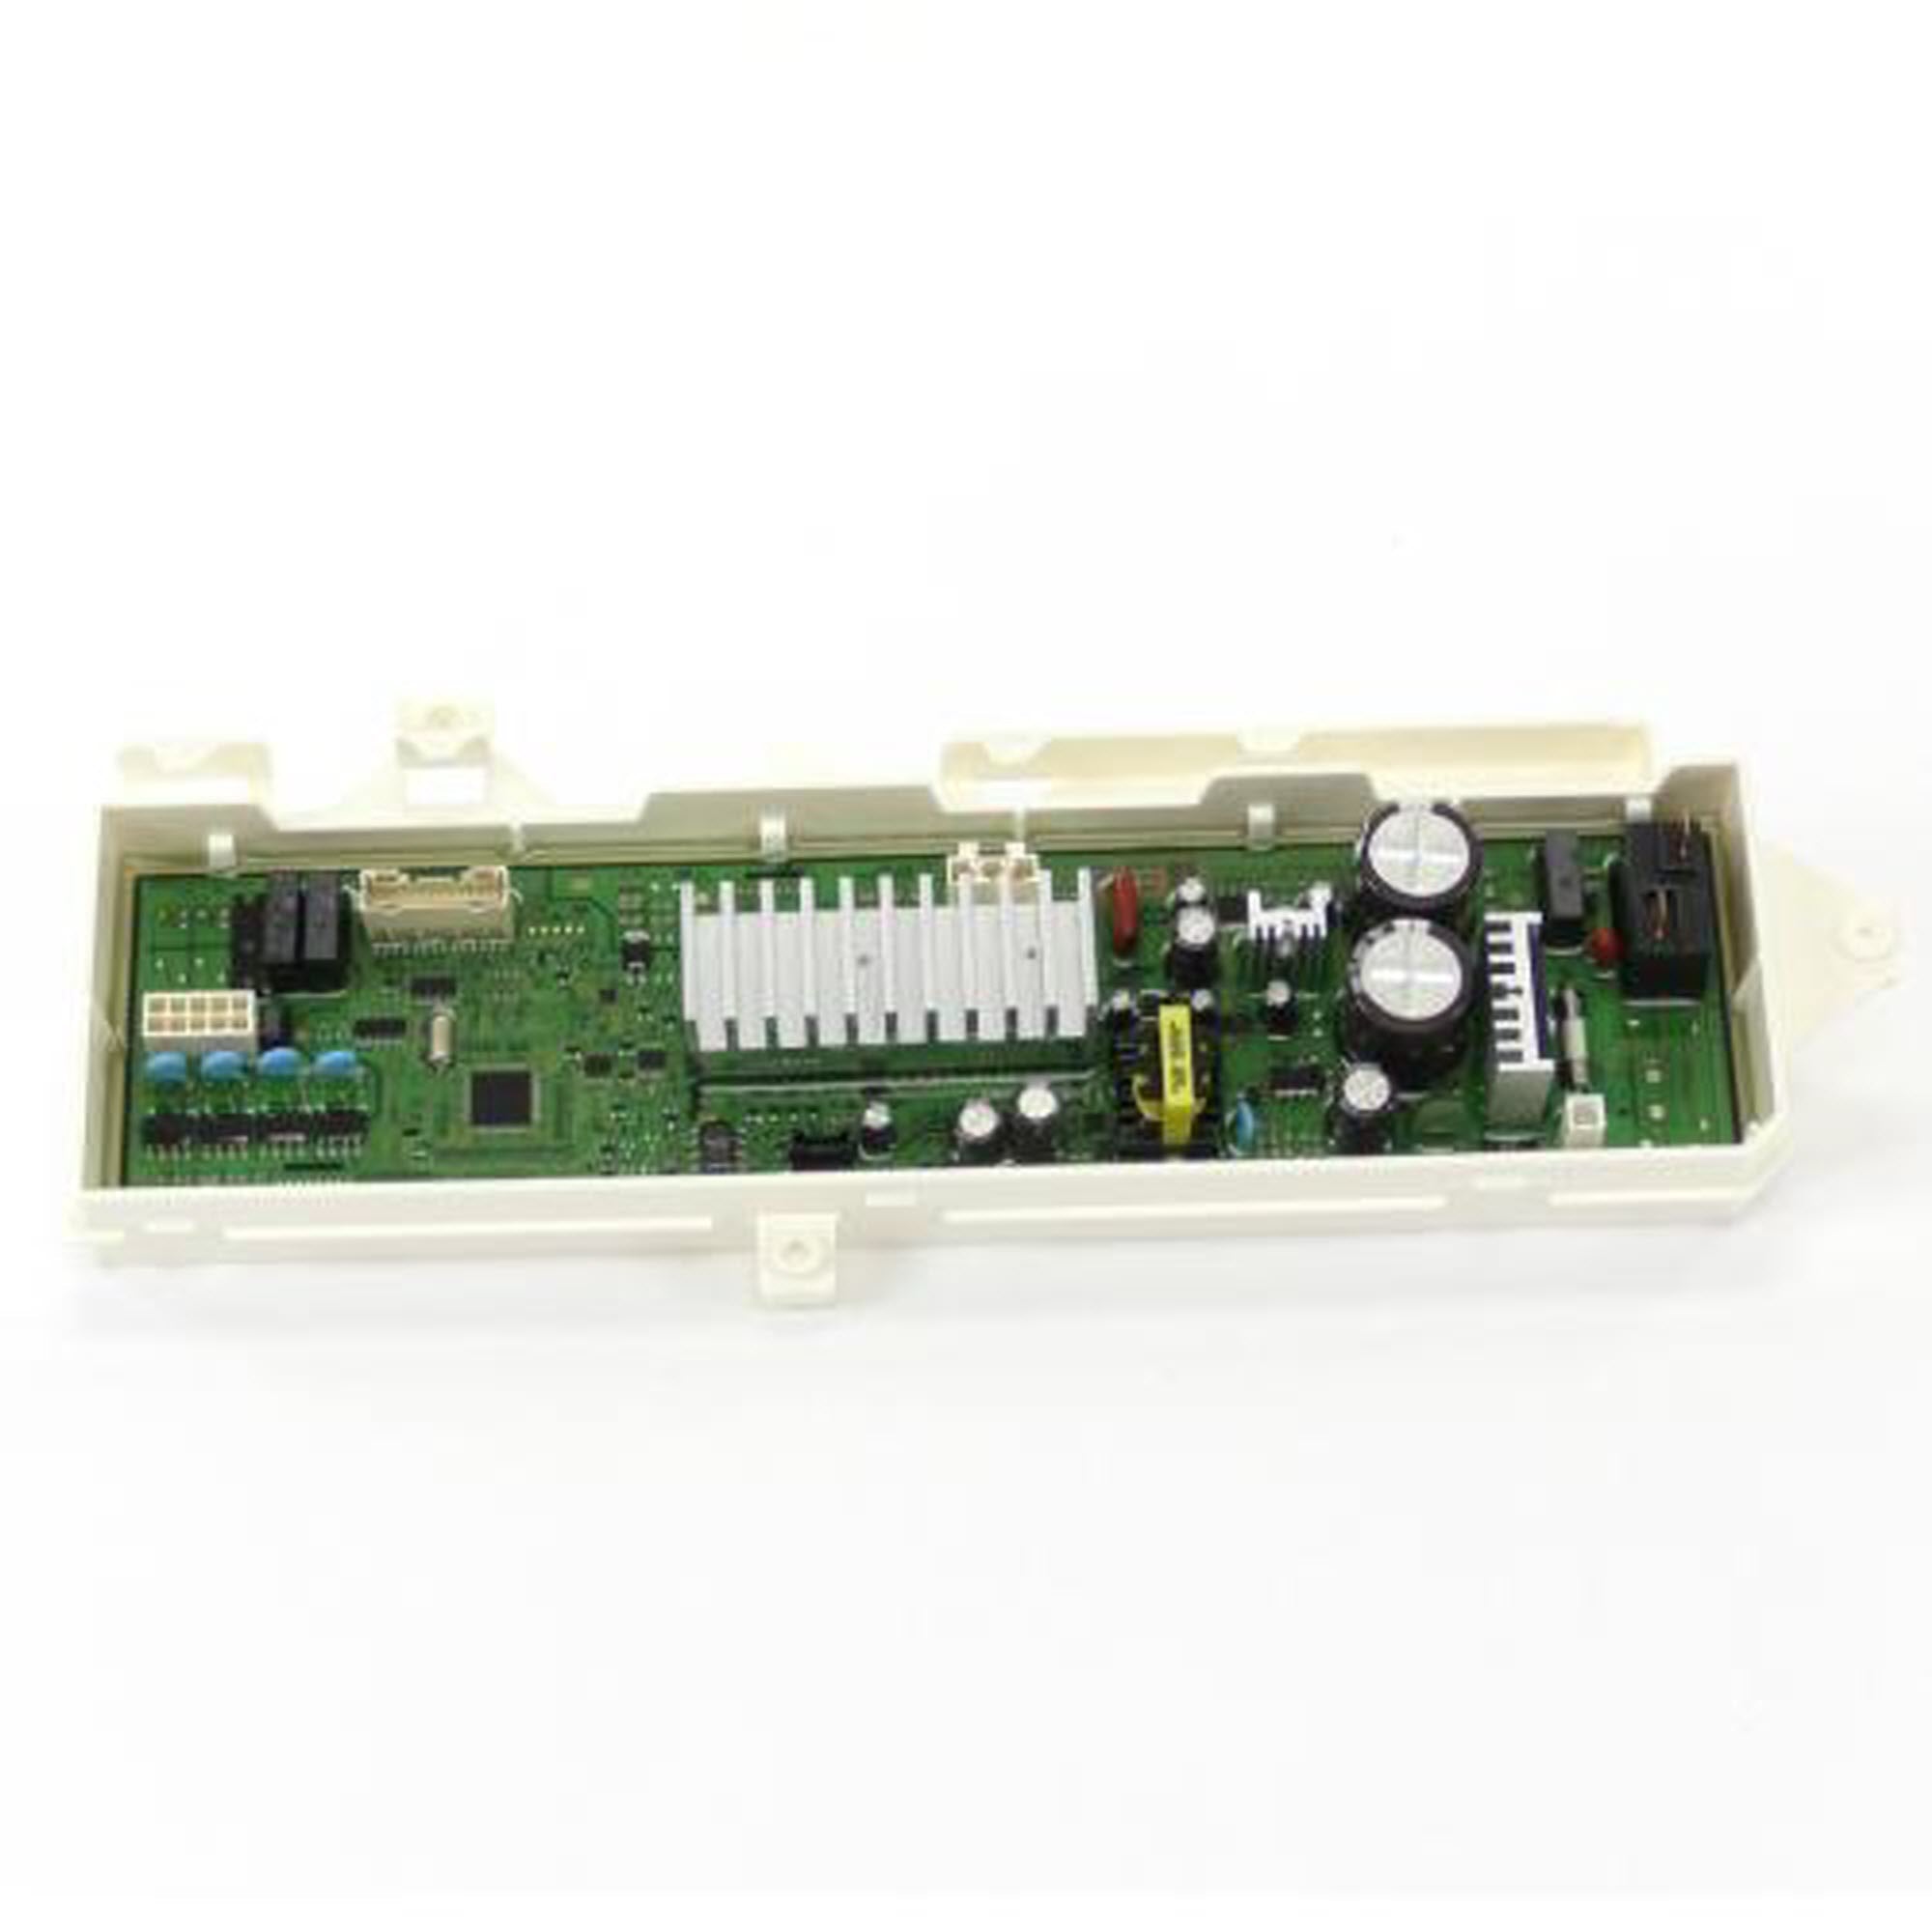 Samsung DC92-02393A Washer Electronic Control Board